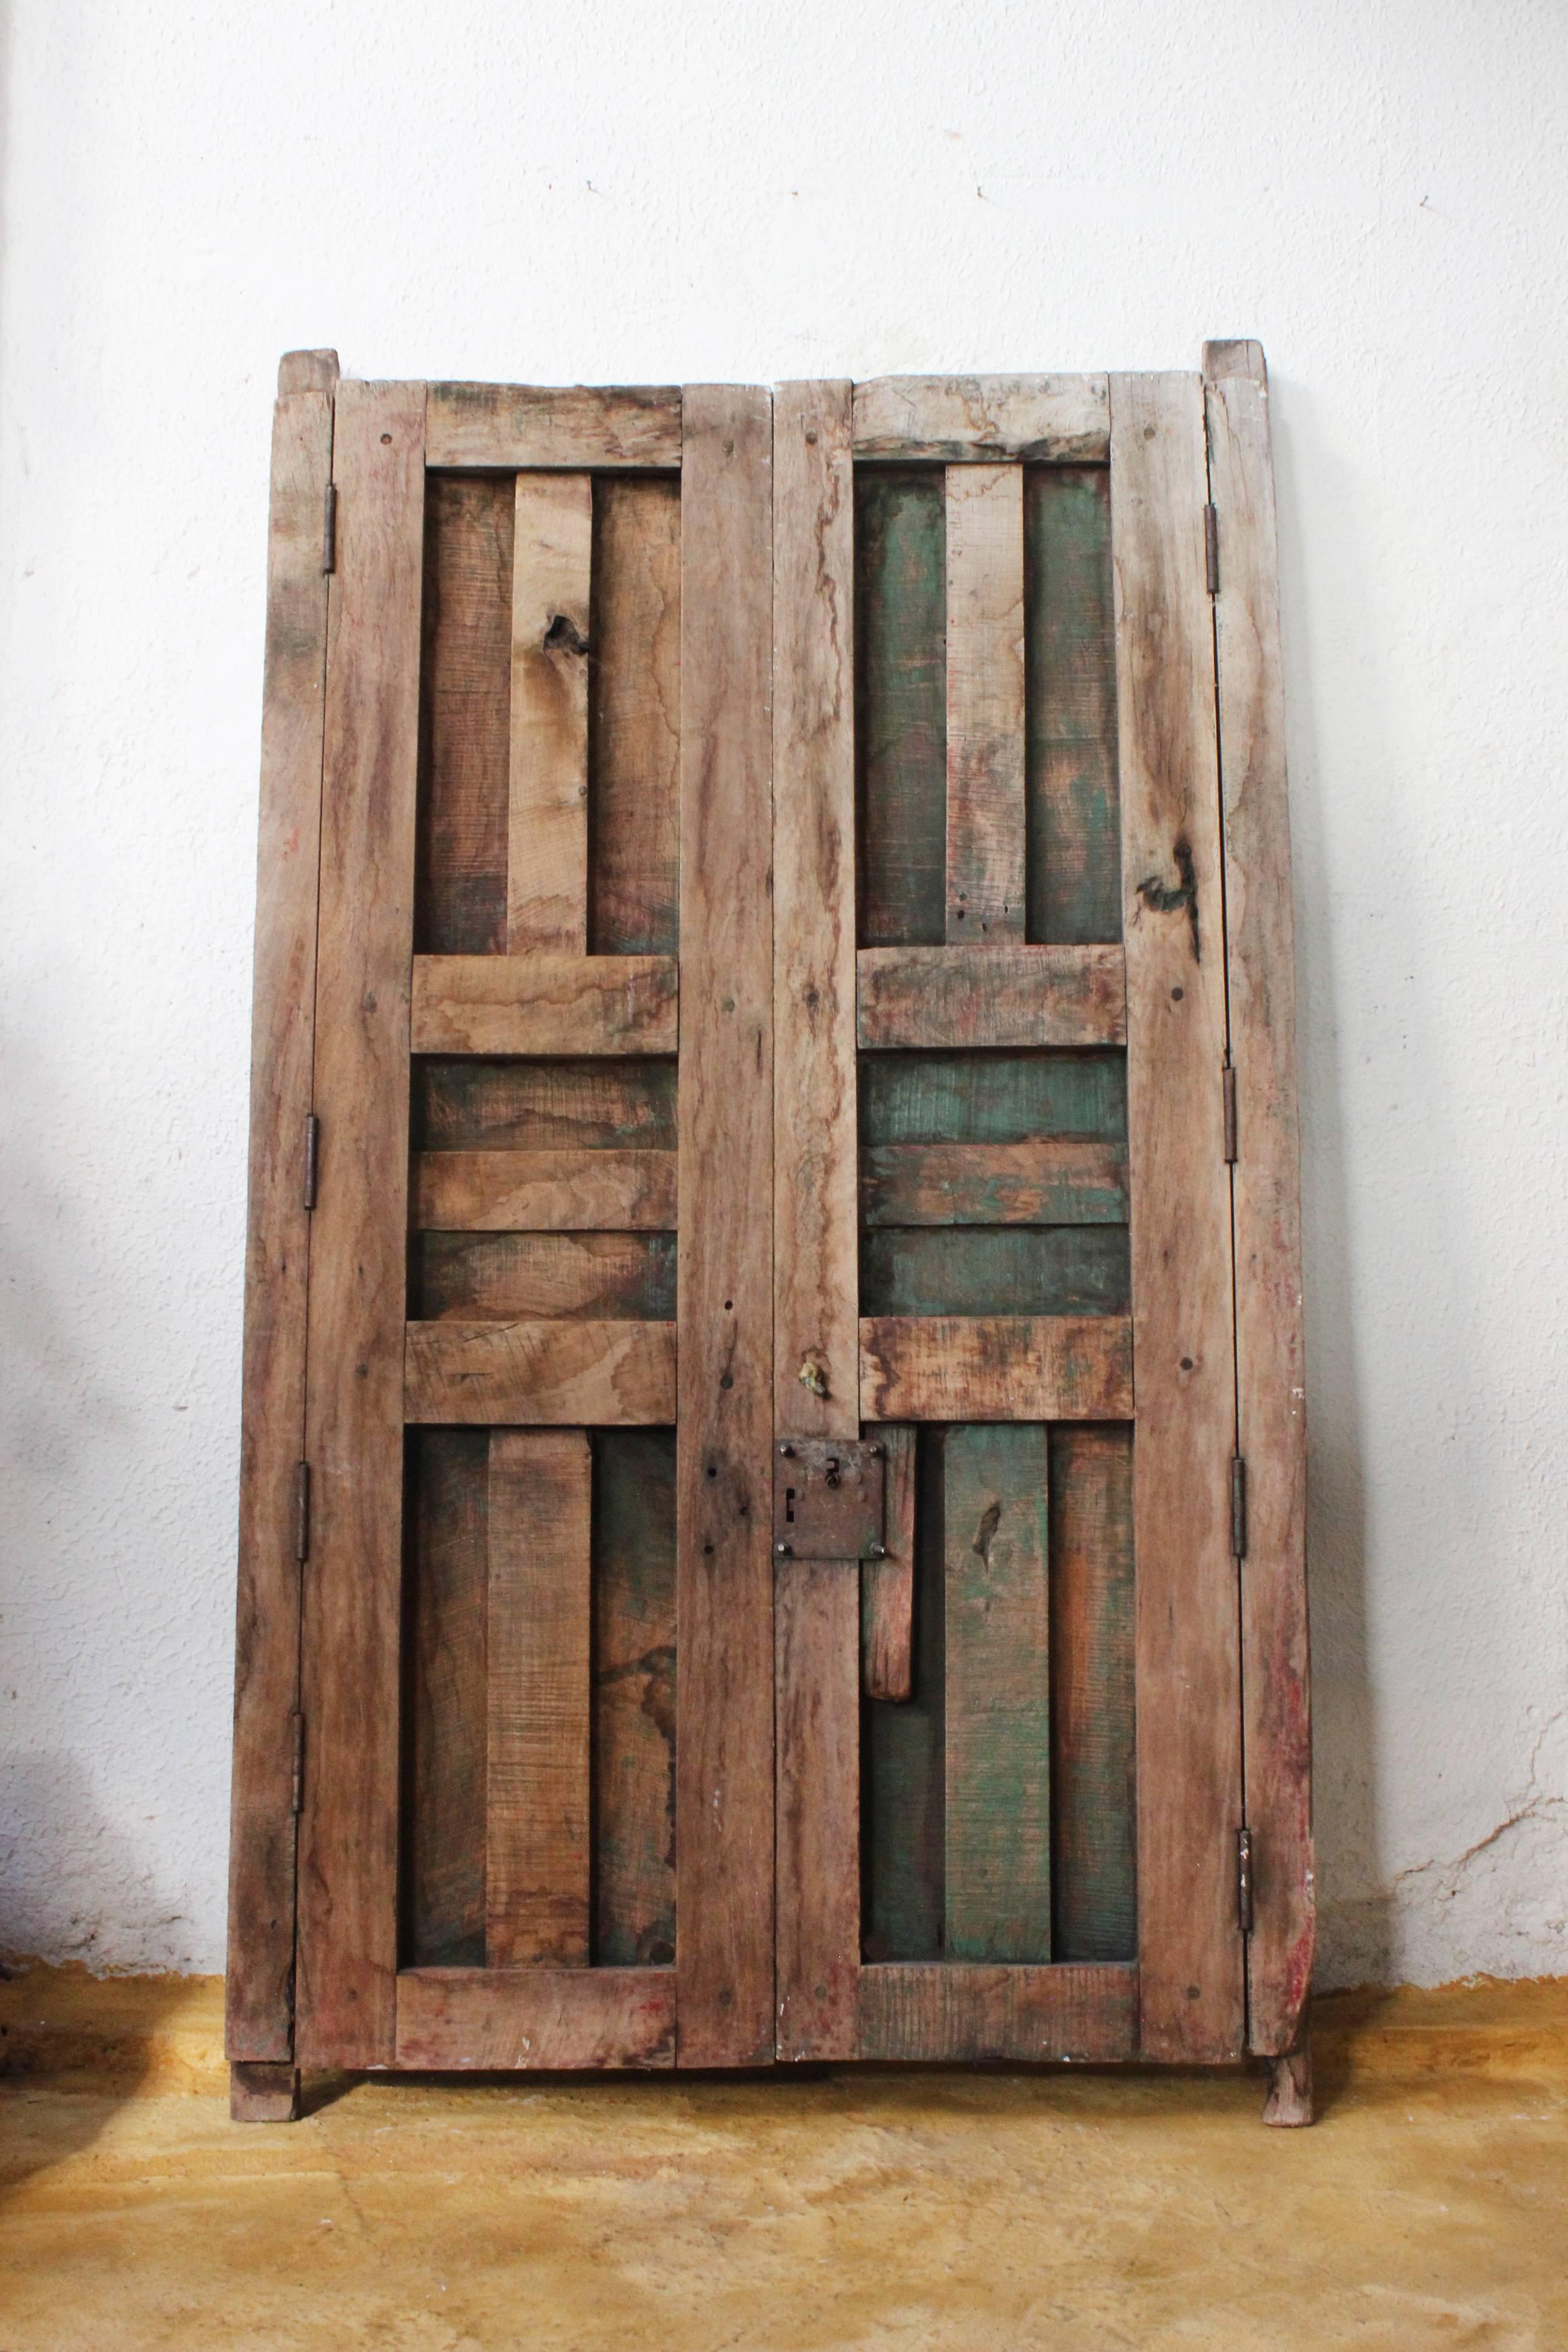 An early 20th century medium sized solid mesquite pair of doors found in Western México, the wood has fabulous cracking, great for many different applications such as a headboard, wall hanging, kitchen pot rack or just a backdrop layer in an